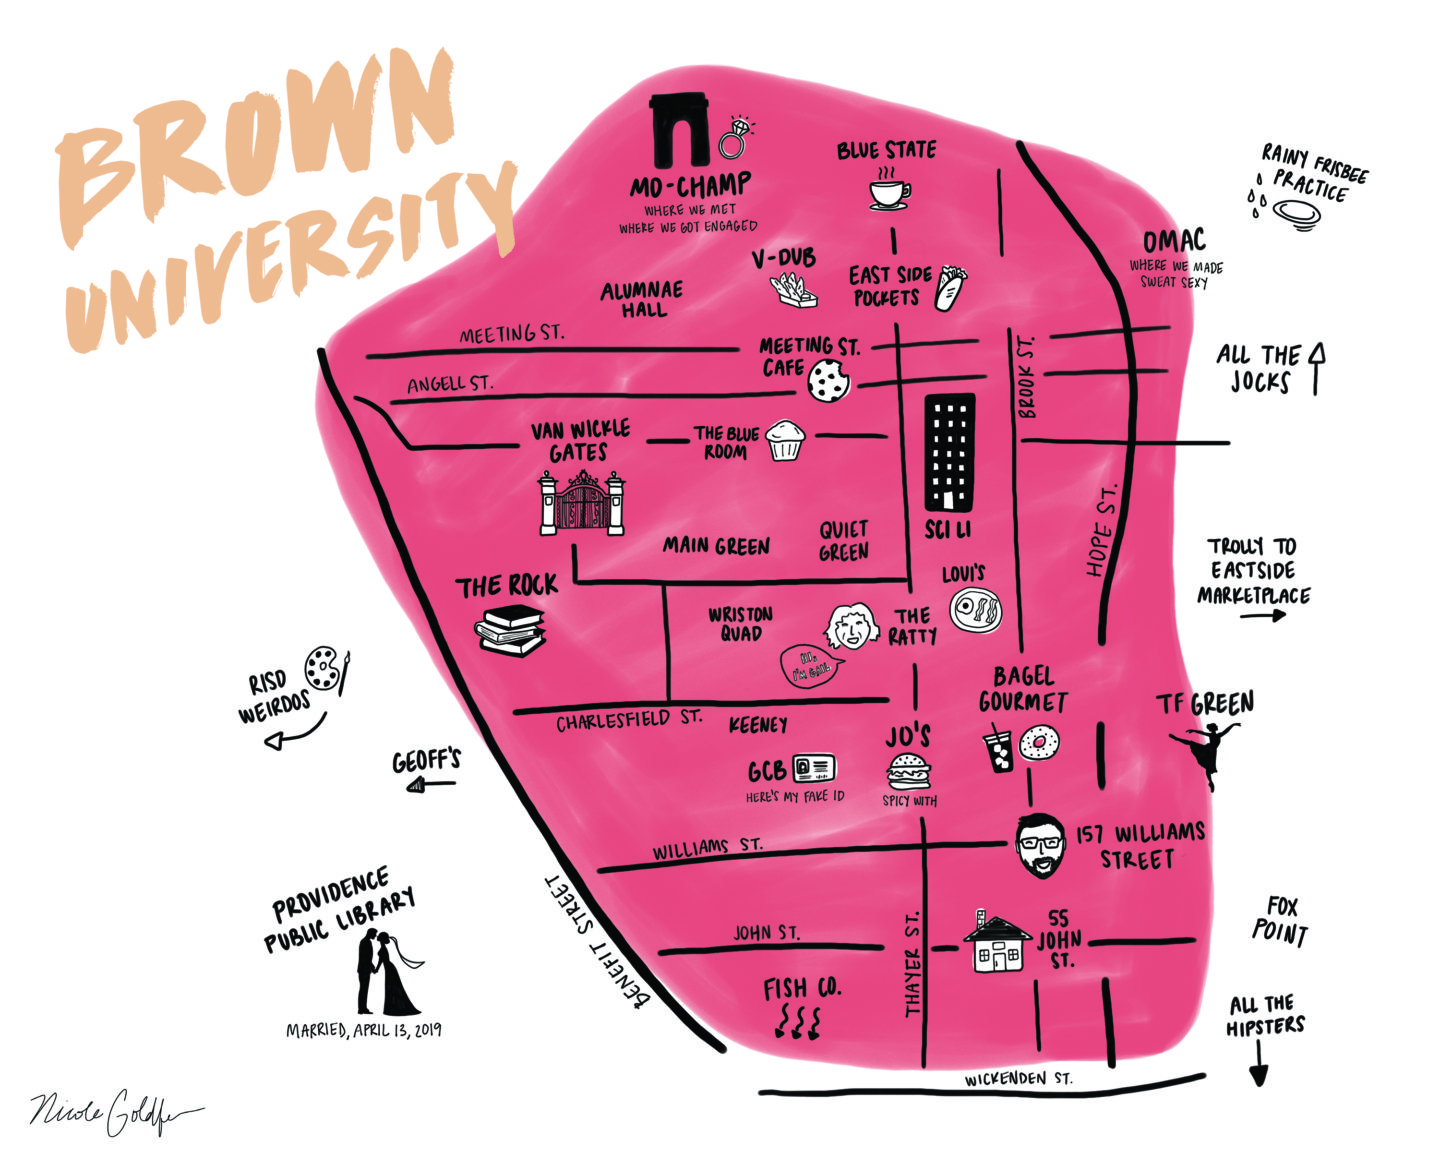 fun wedding gift idea for college friends, brown university customized campus map 